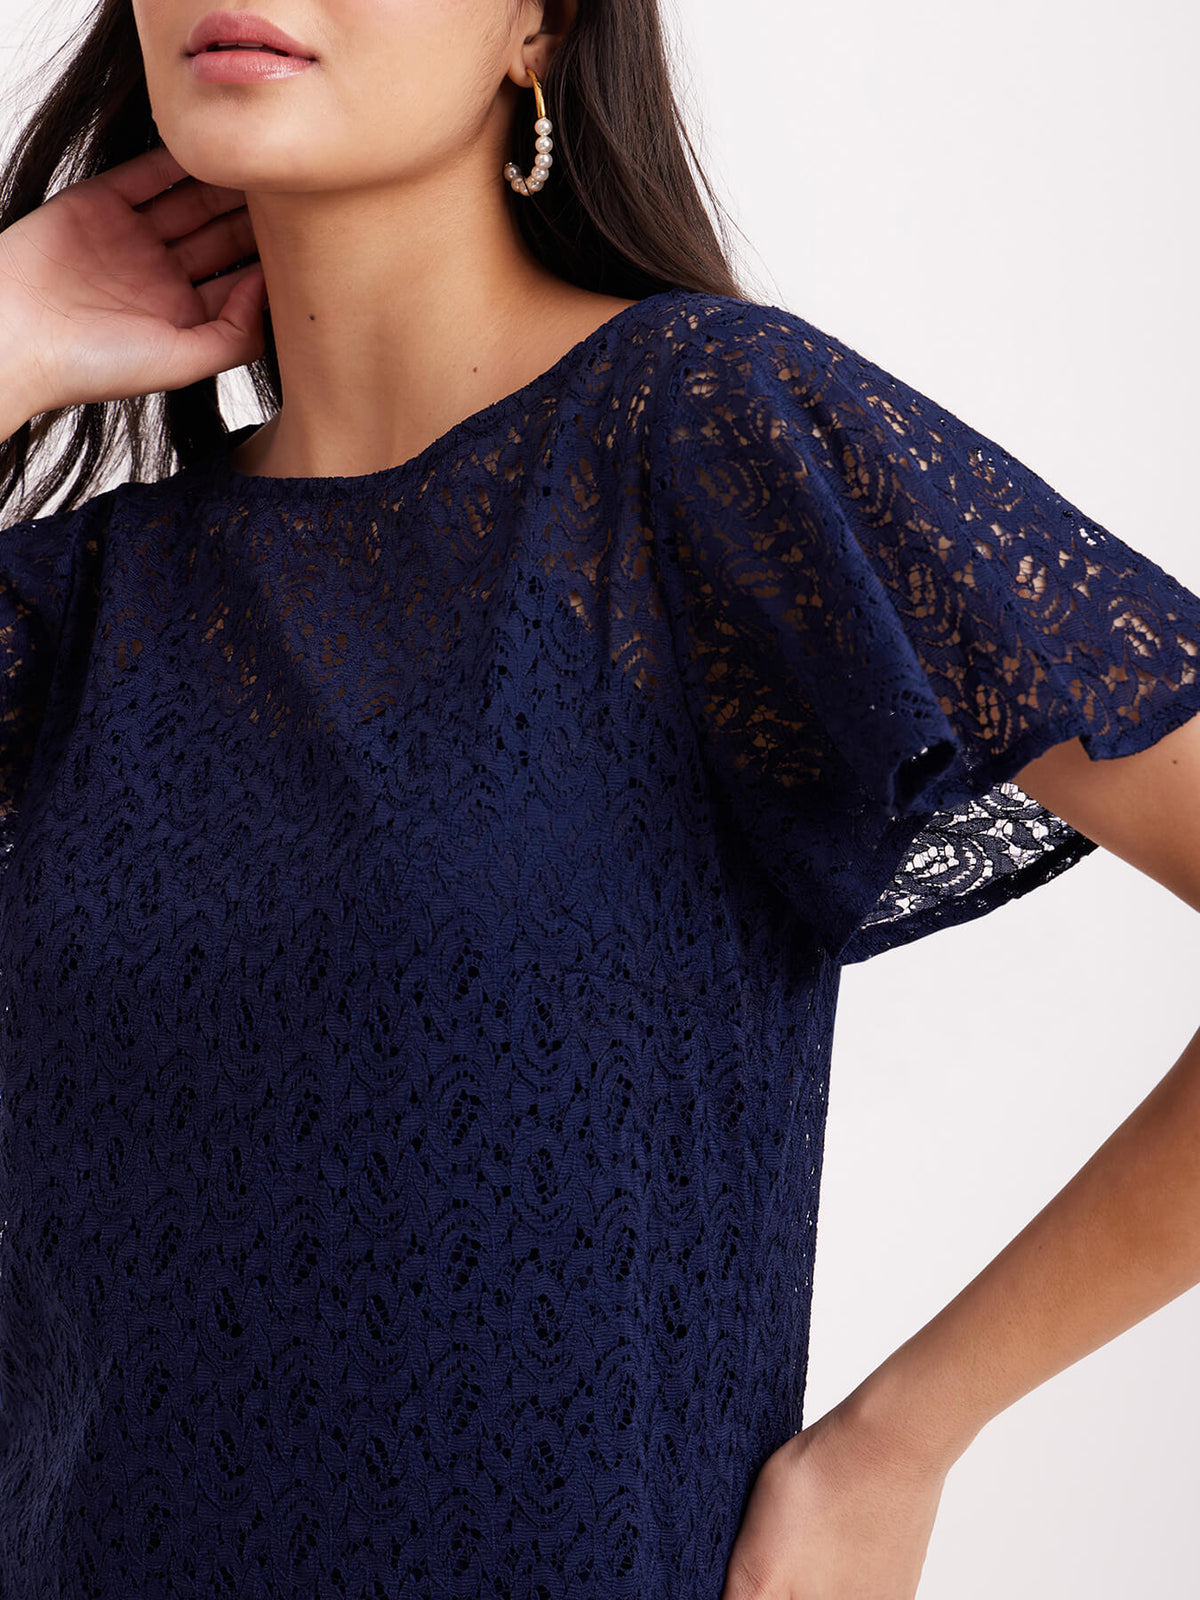 Bell Sleeves Lace Top - Navy Blue